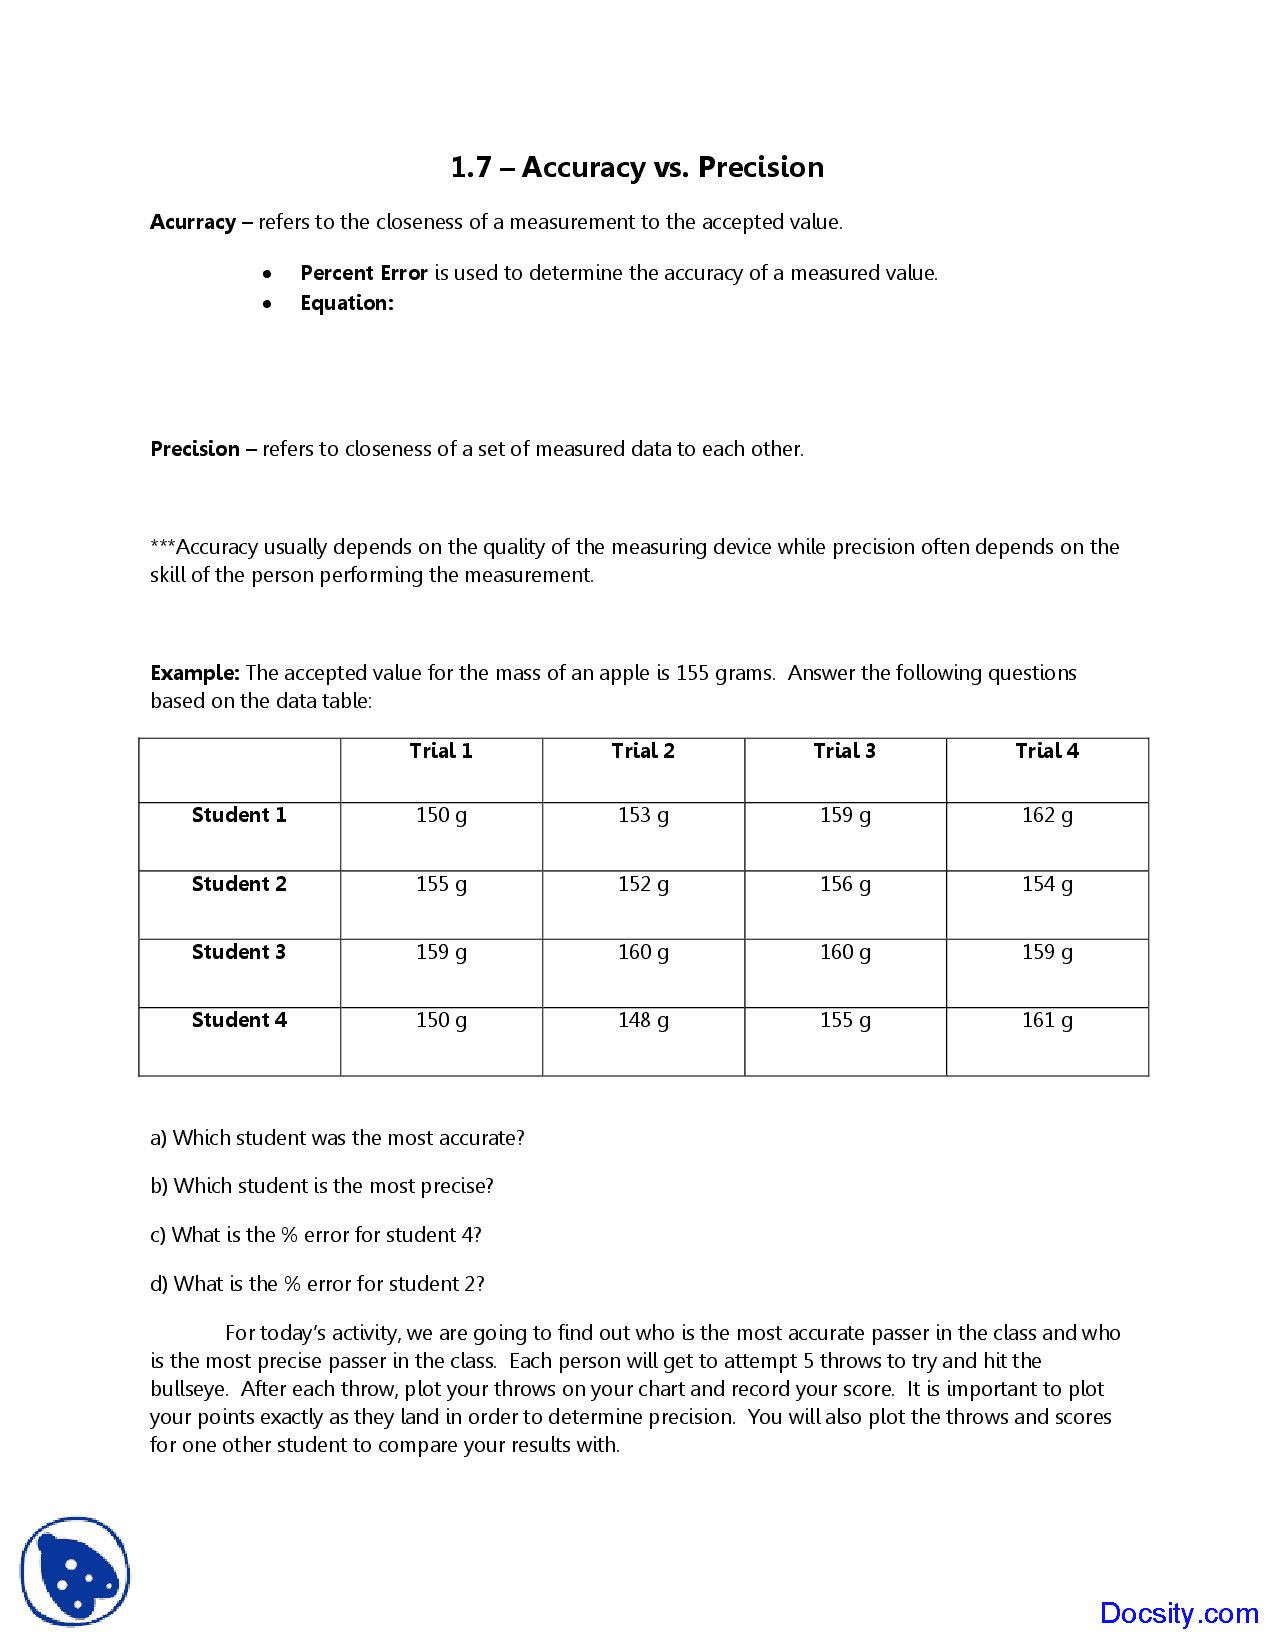 Accuracy and Precision Worksheet Answers Inspiring Accuracy and Precision Worksheet Answers